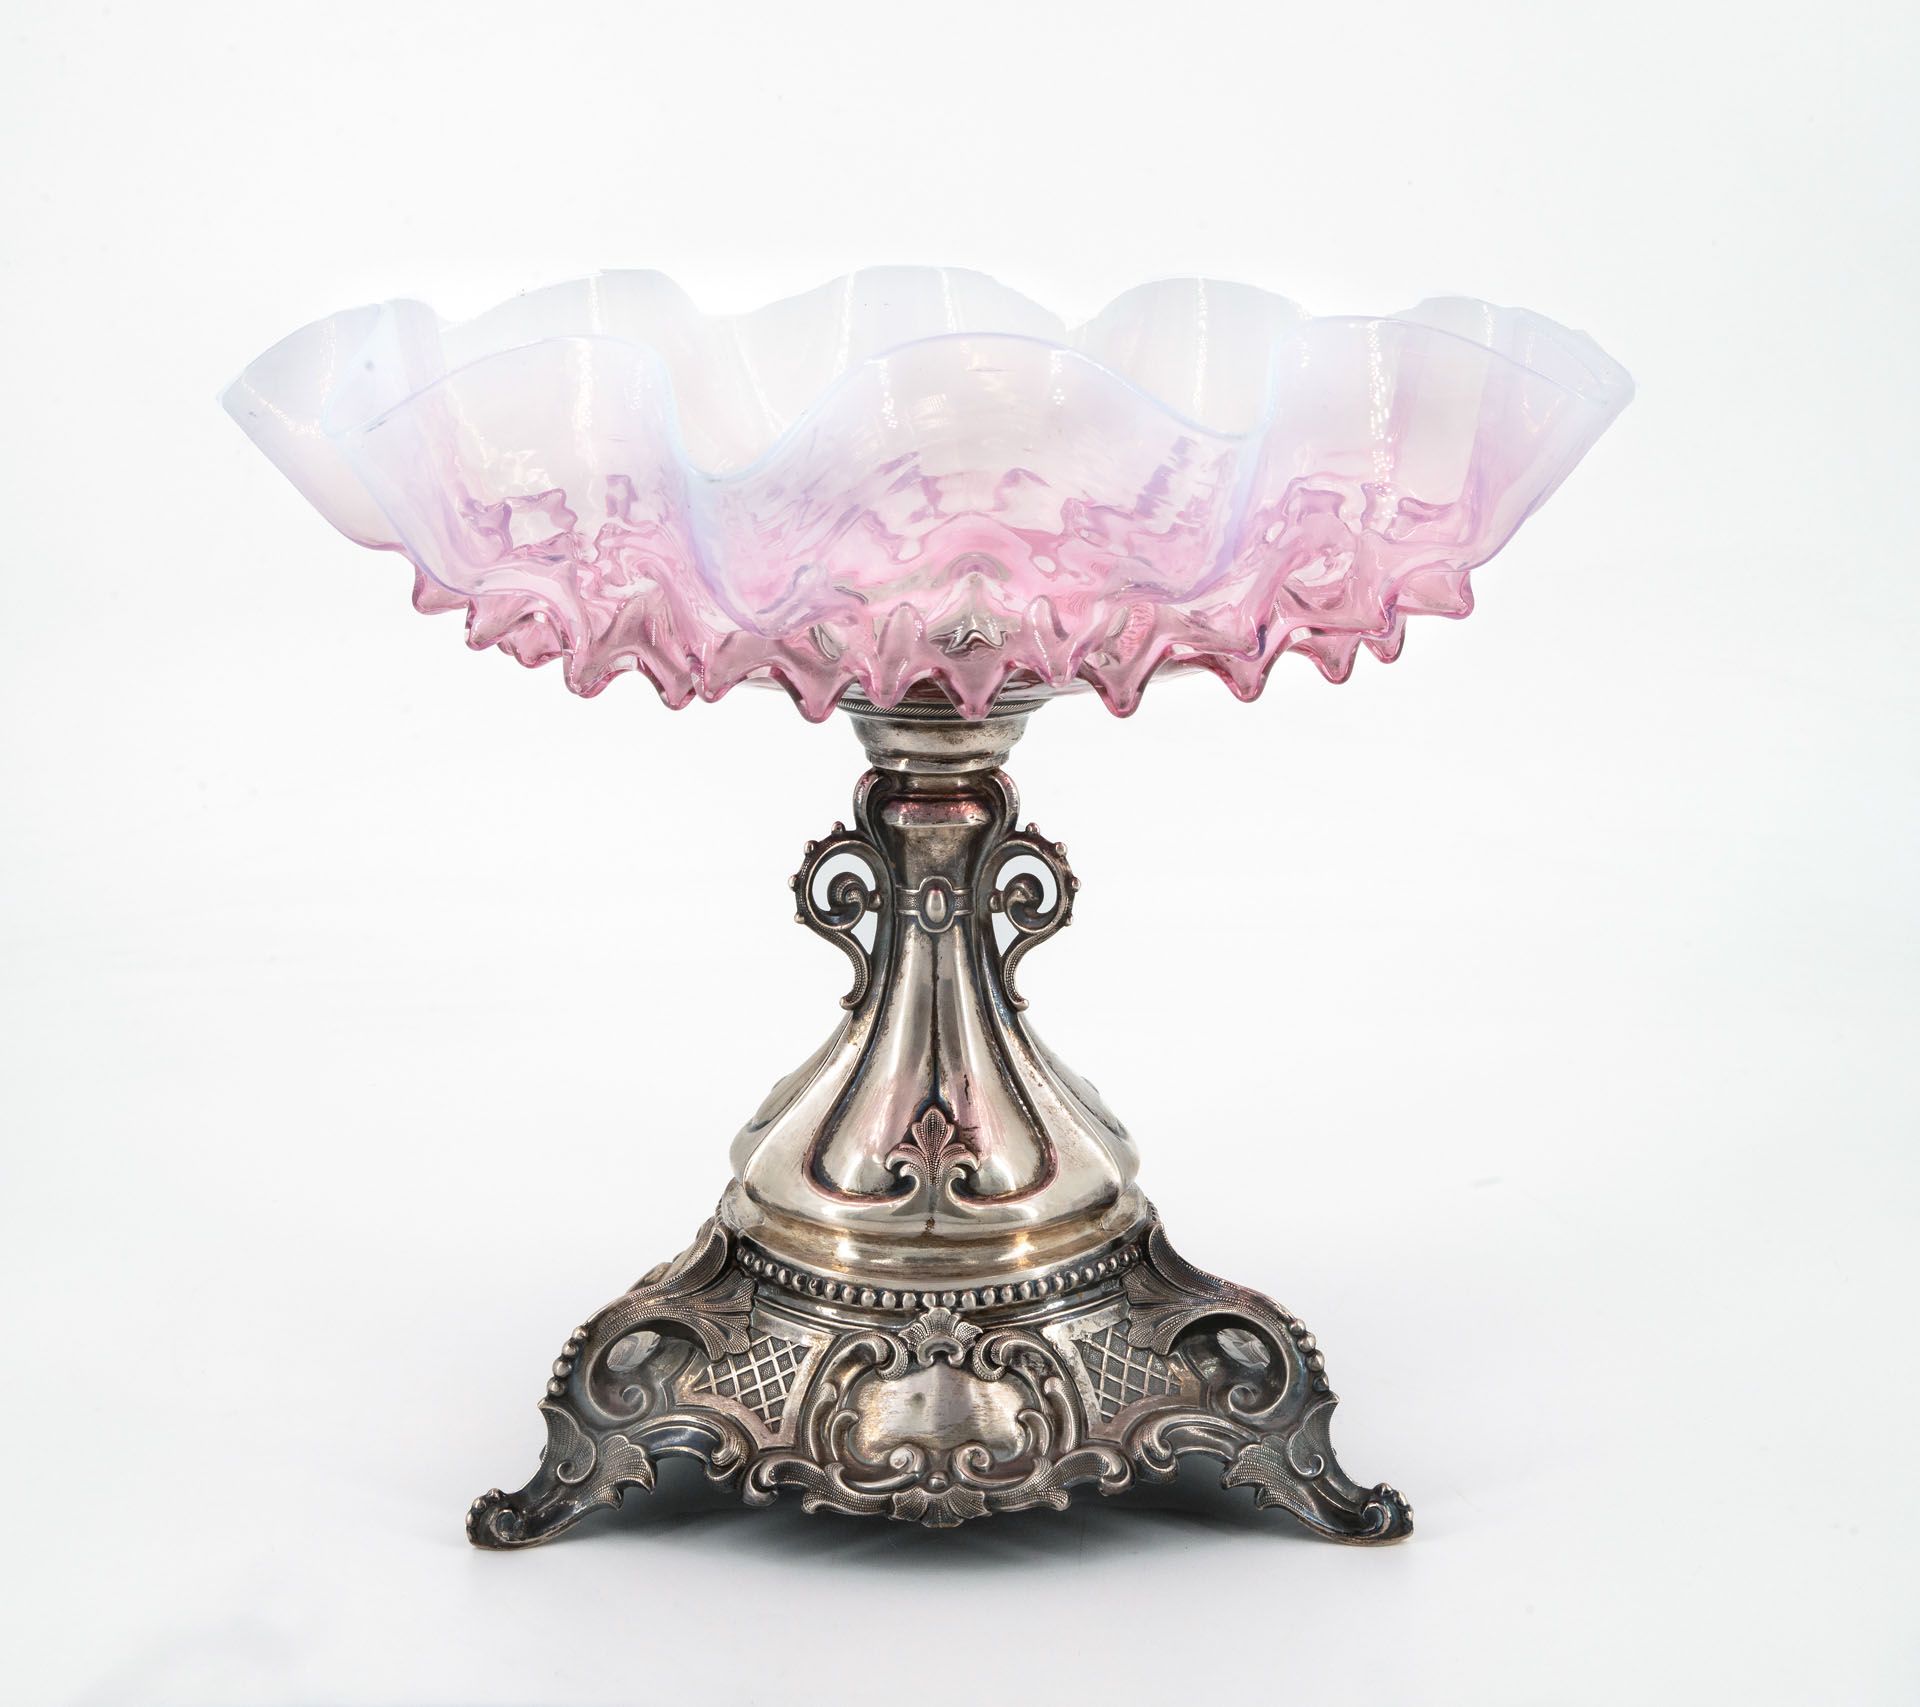 A Fine Silver and Pink Glass Centerpiece, Prob. Belgium, Late 19th Century